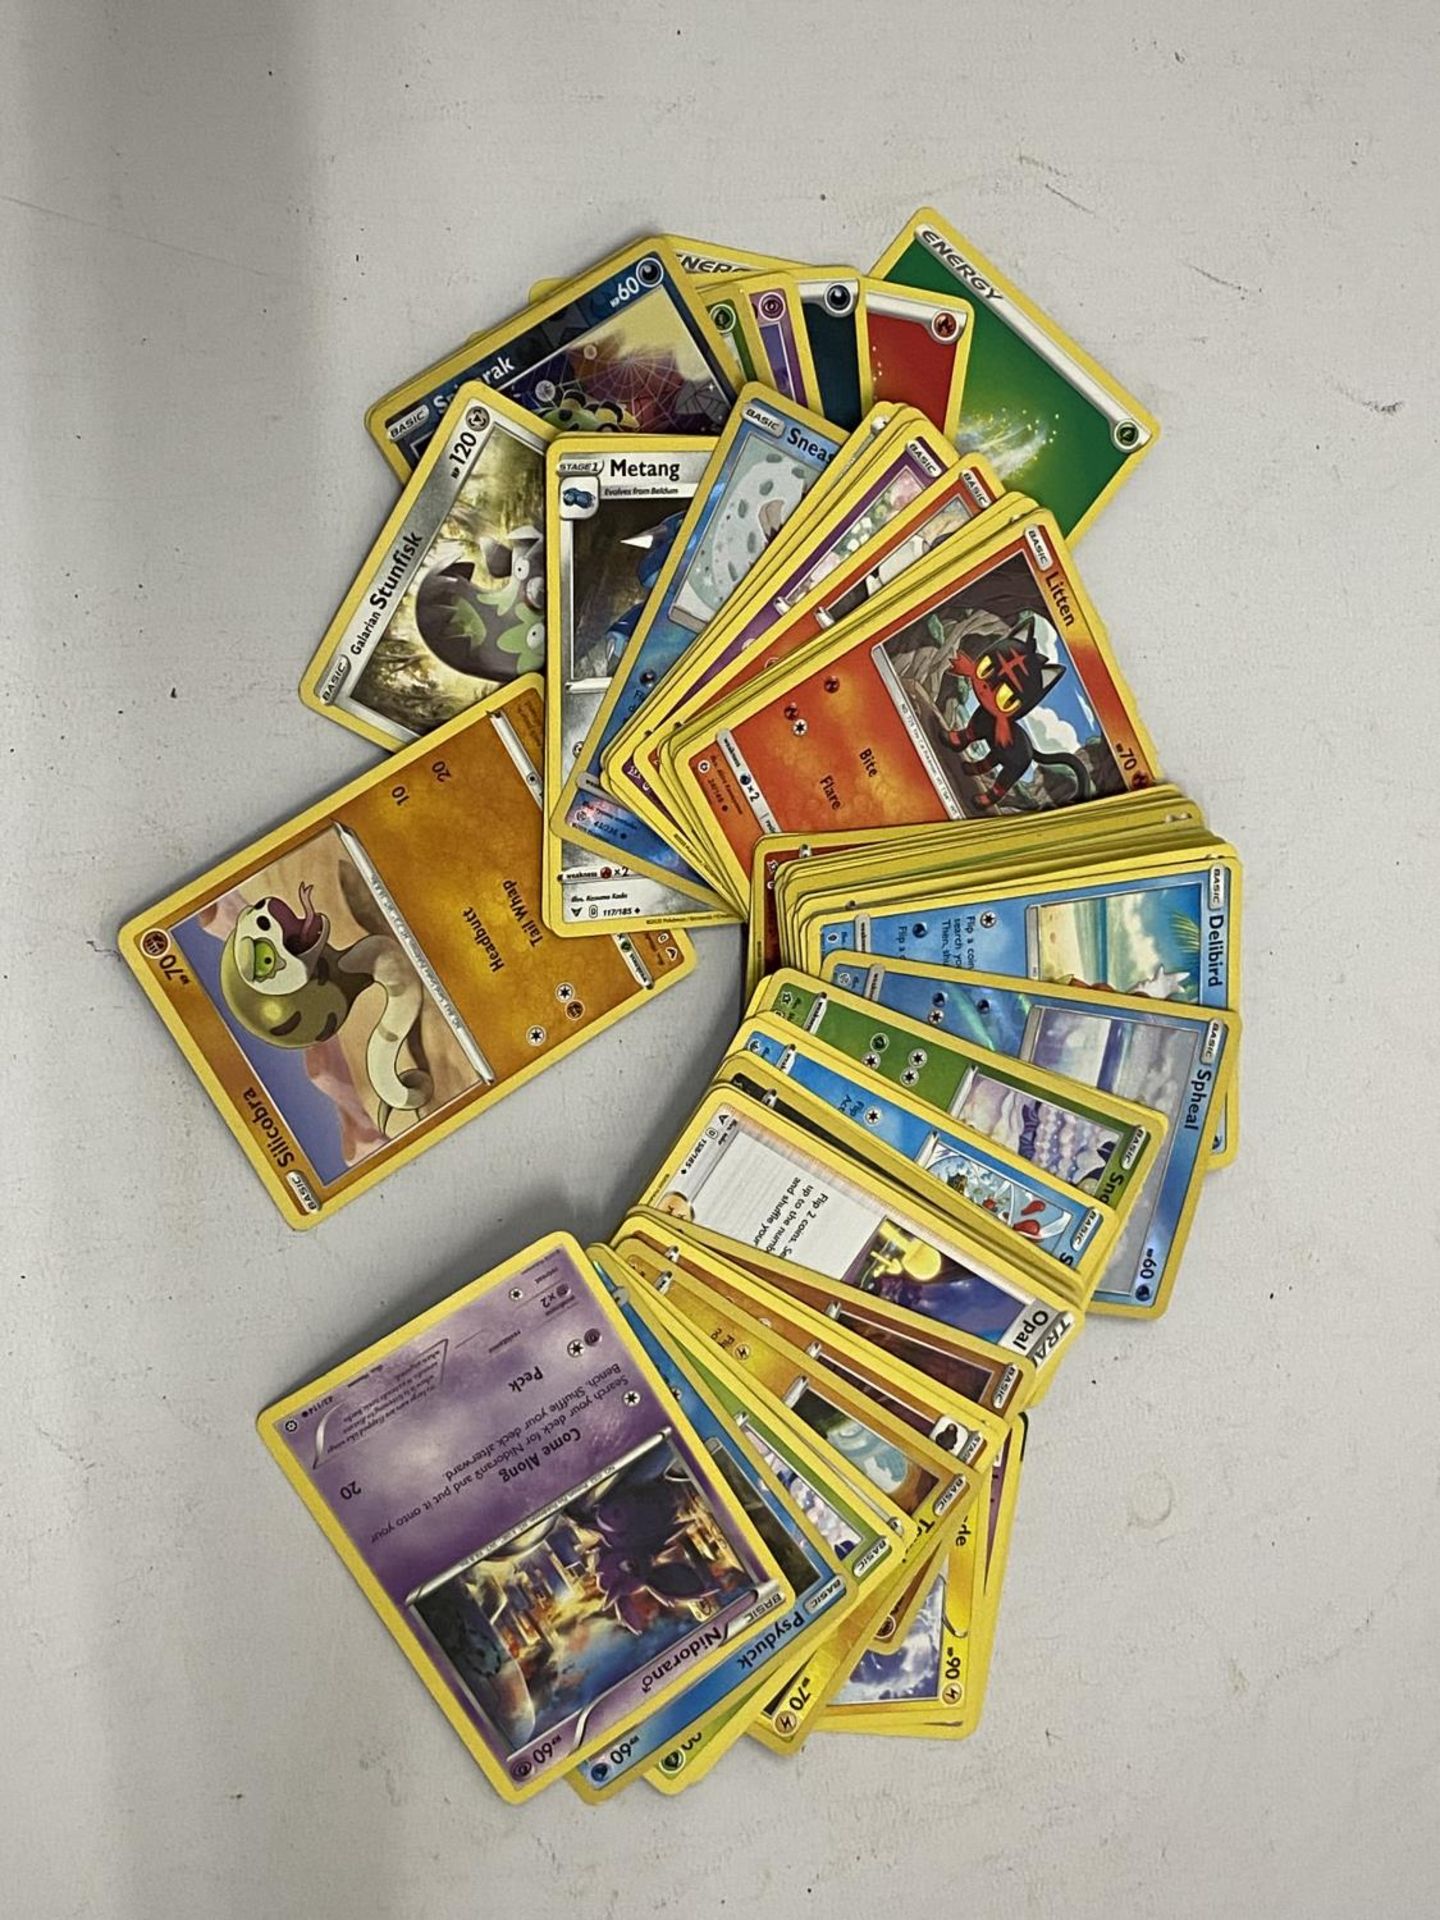 A QUANTITY OF POKEMON CARDS - 76 IN TOTAL